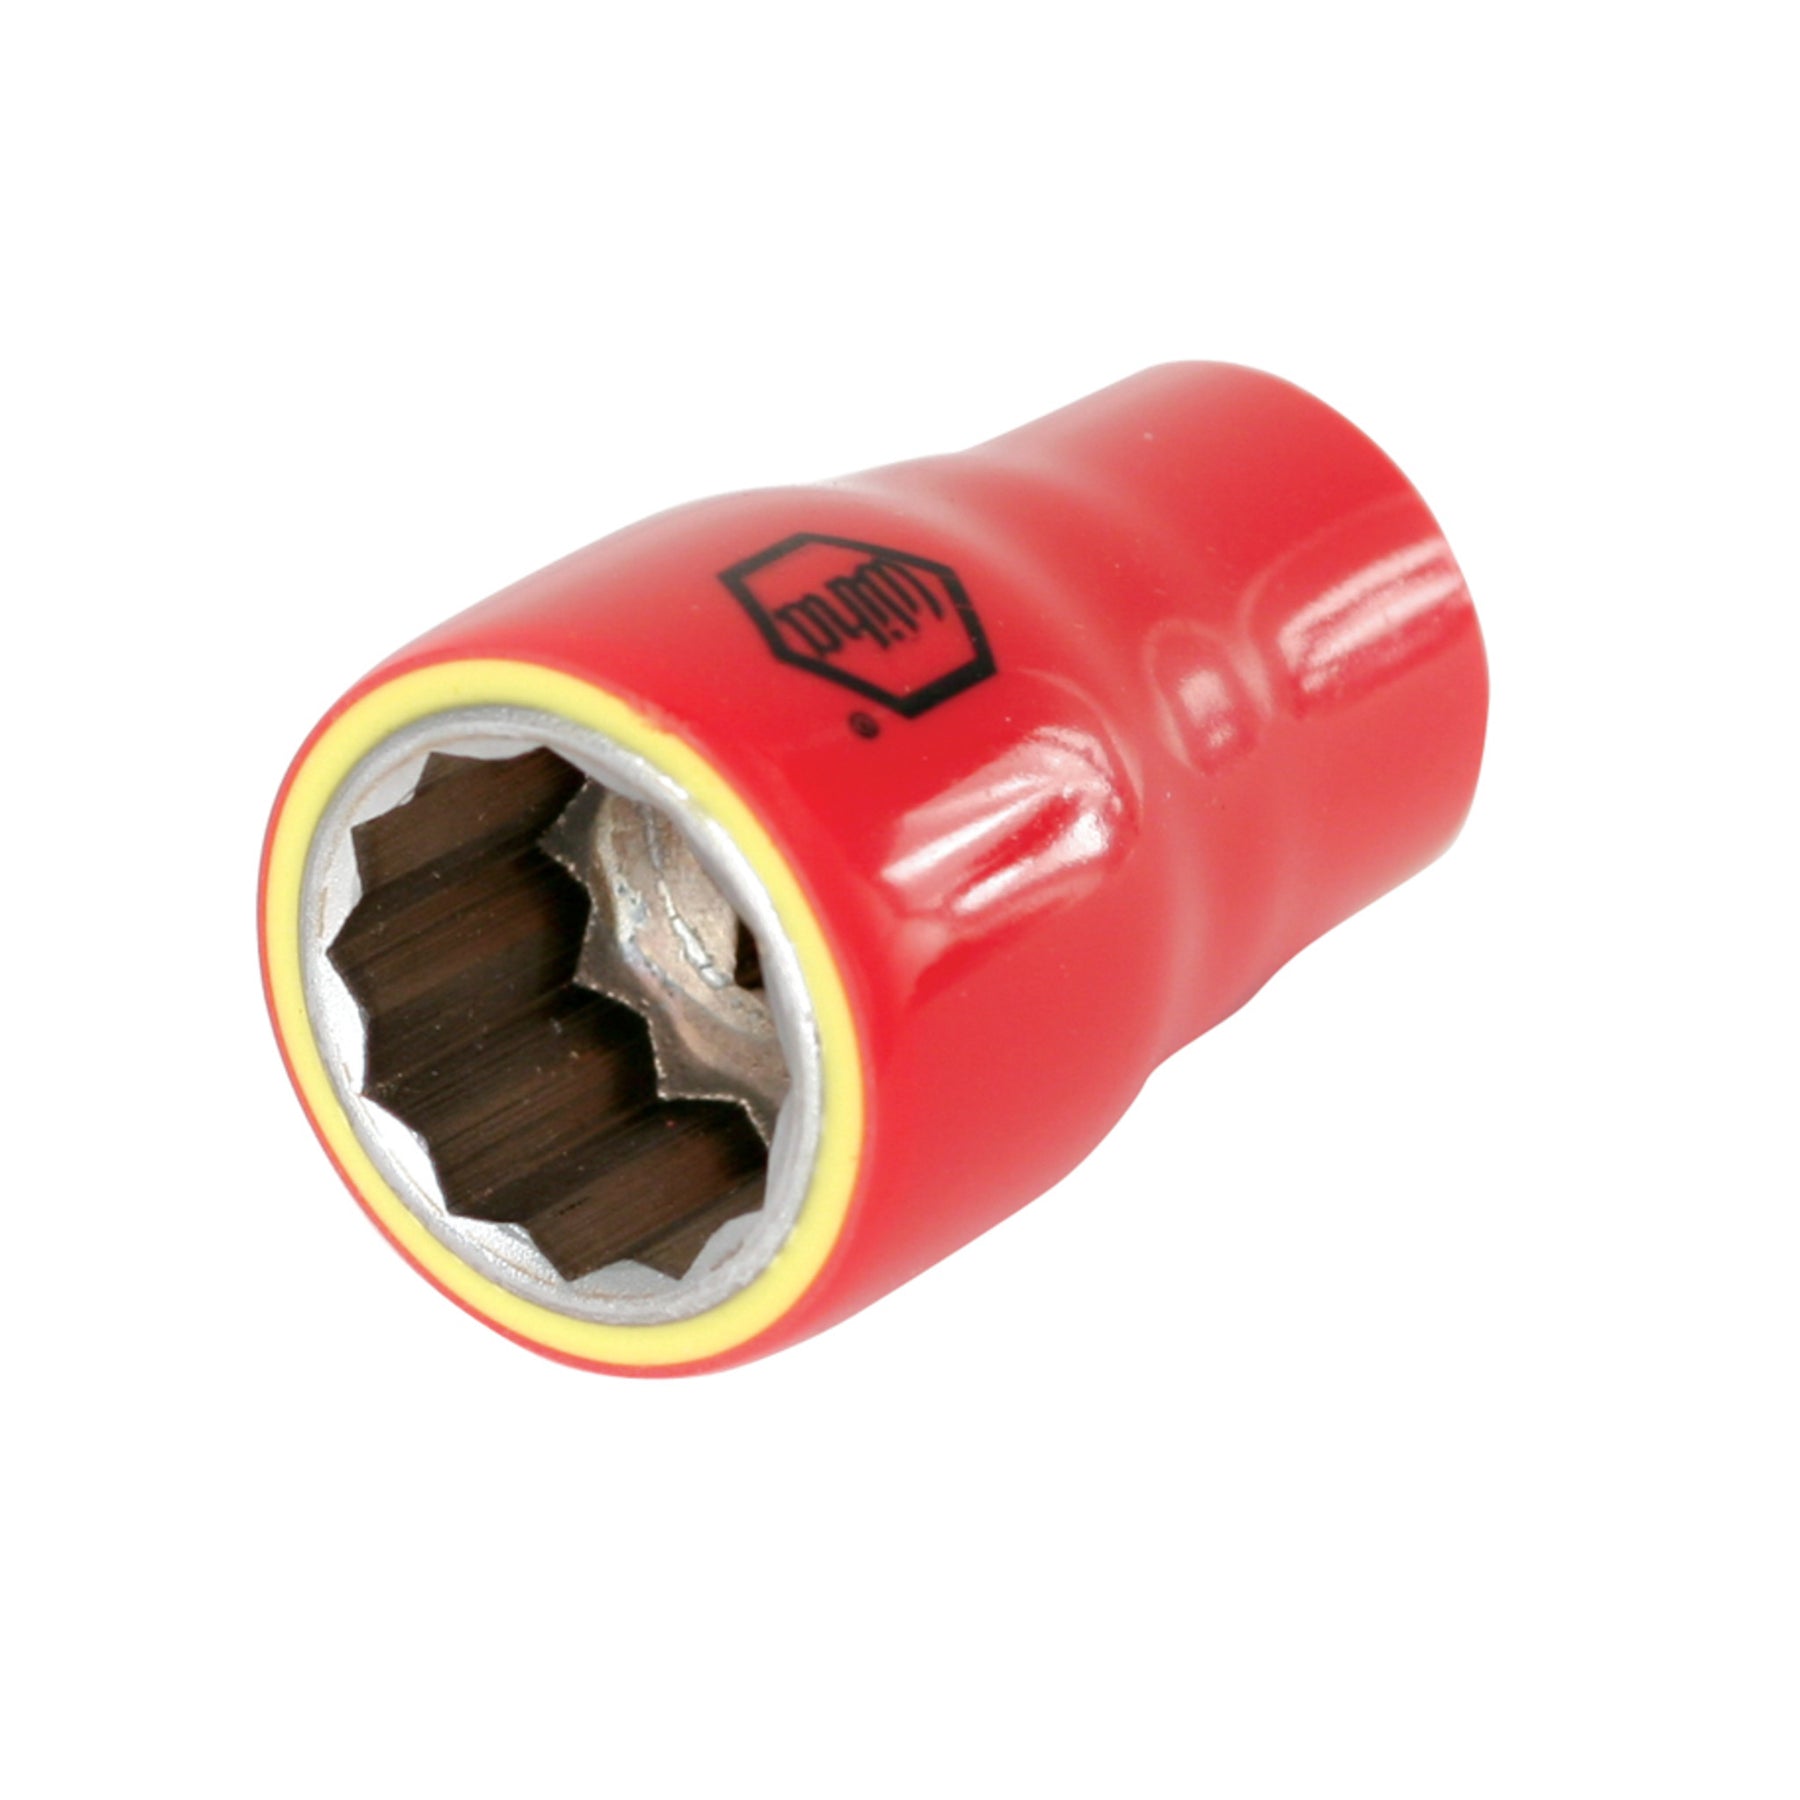 Insulated Socket 1/2" Drive 13/16"